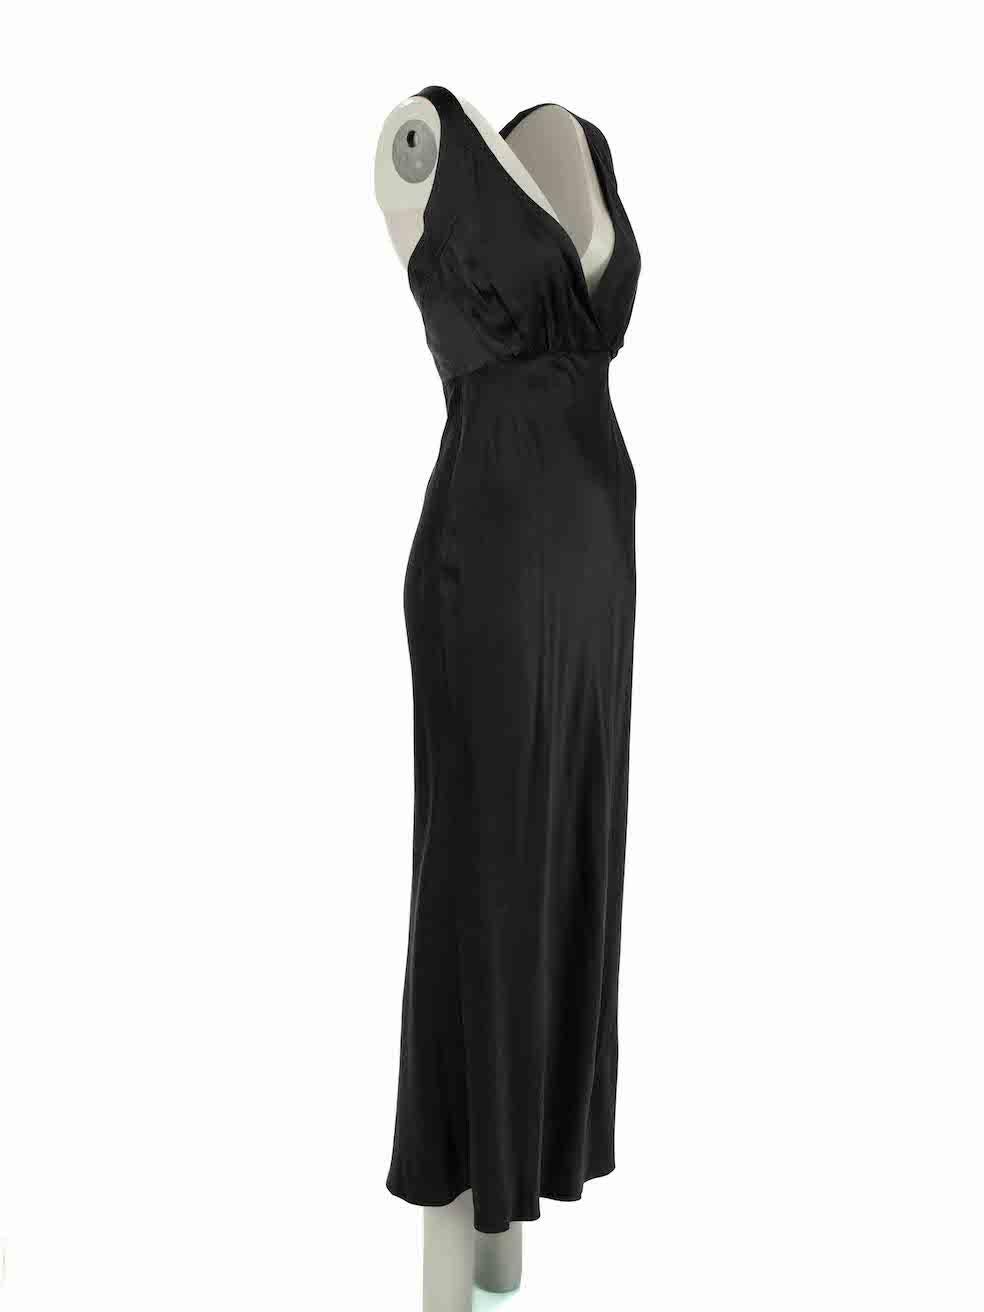 CONDITION is Very good. Minimal wear to dress is evident. Minimal wear to the silk with light discolouration all over on this used Khaite designer resale item.
 
Details
Black
Silk
Dress
Sleeveless
V-neck
Side button fastening
 
Made in